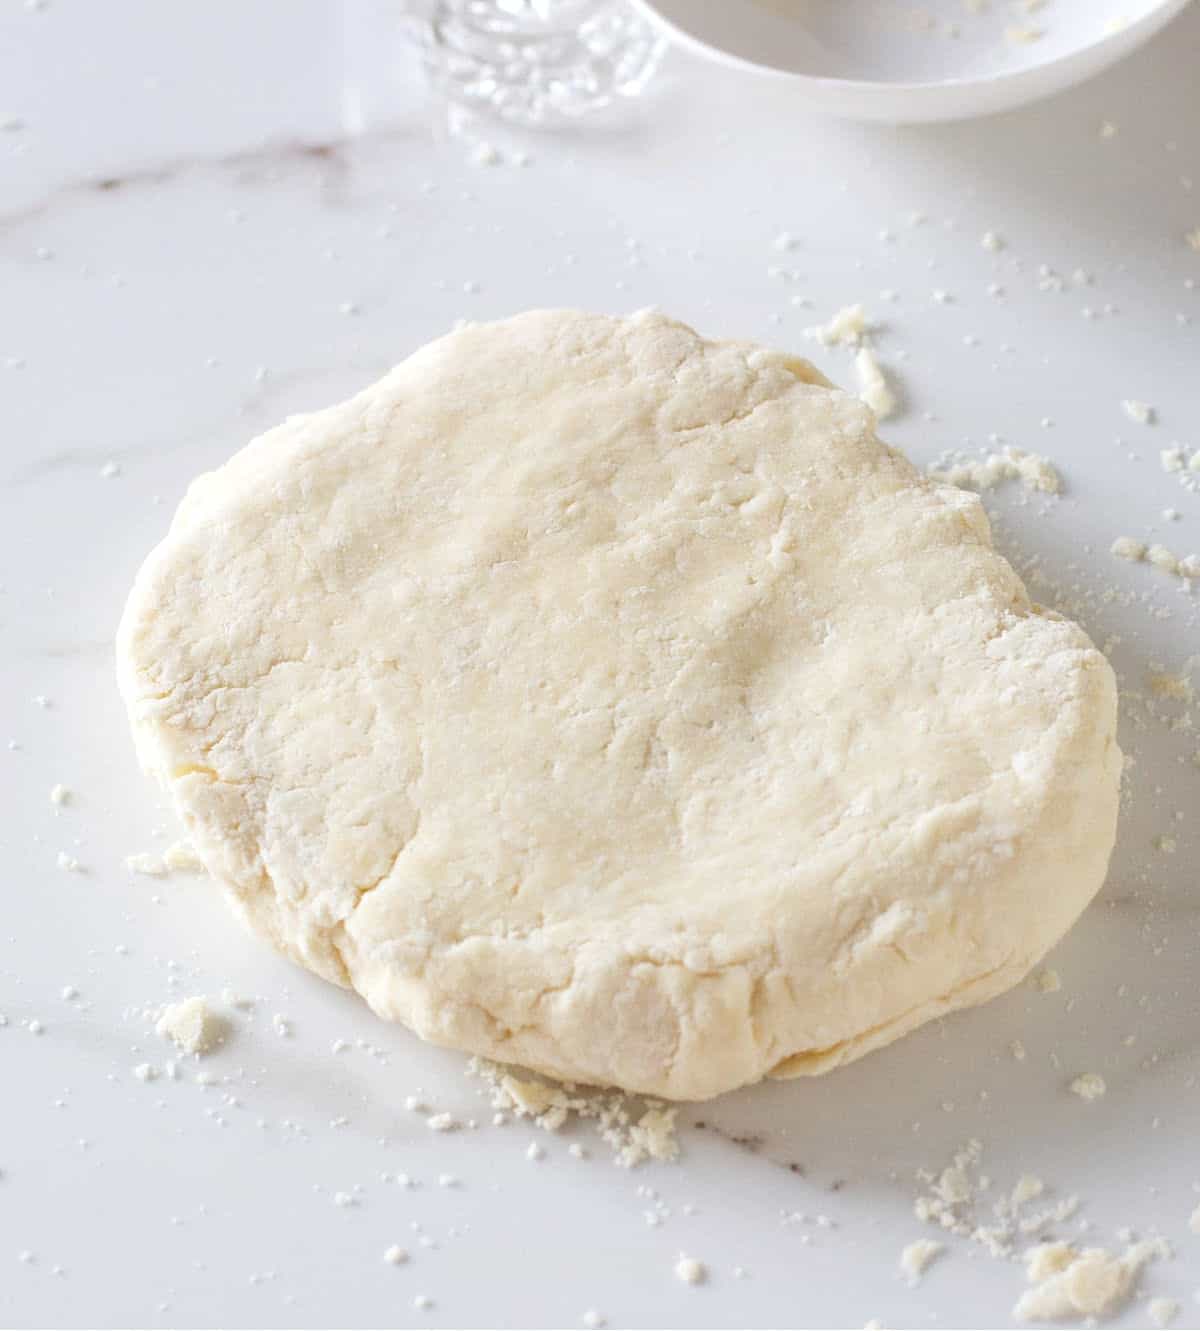 Round piece of pie crust dough on a white marble surface.